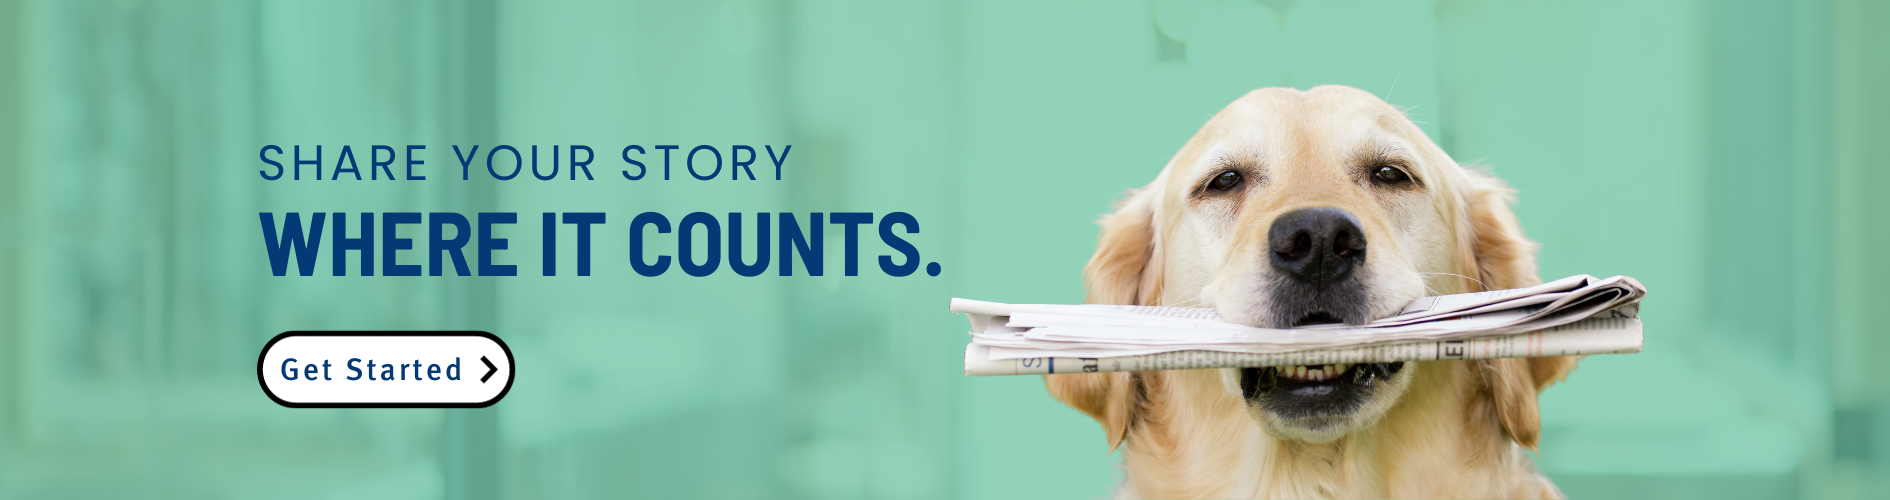 Share your story where it counts